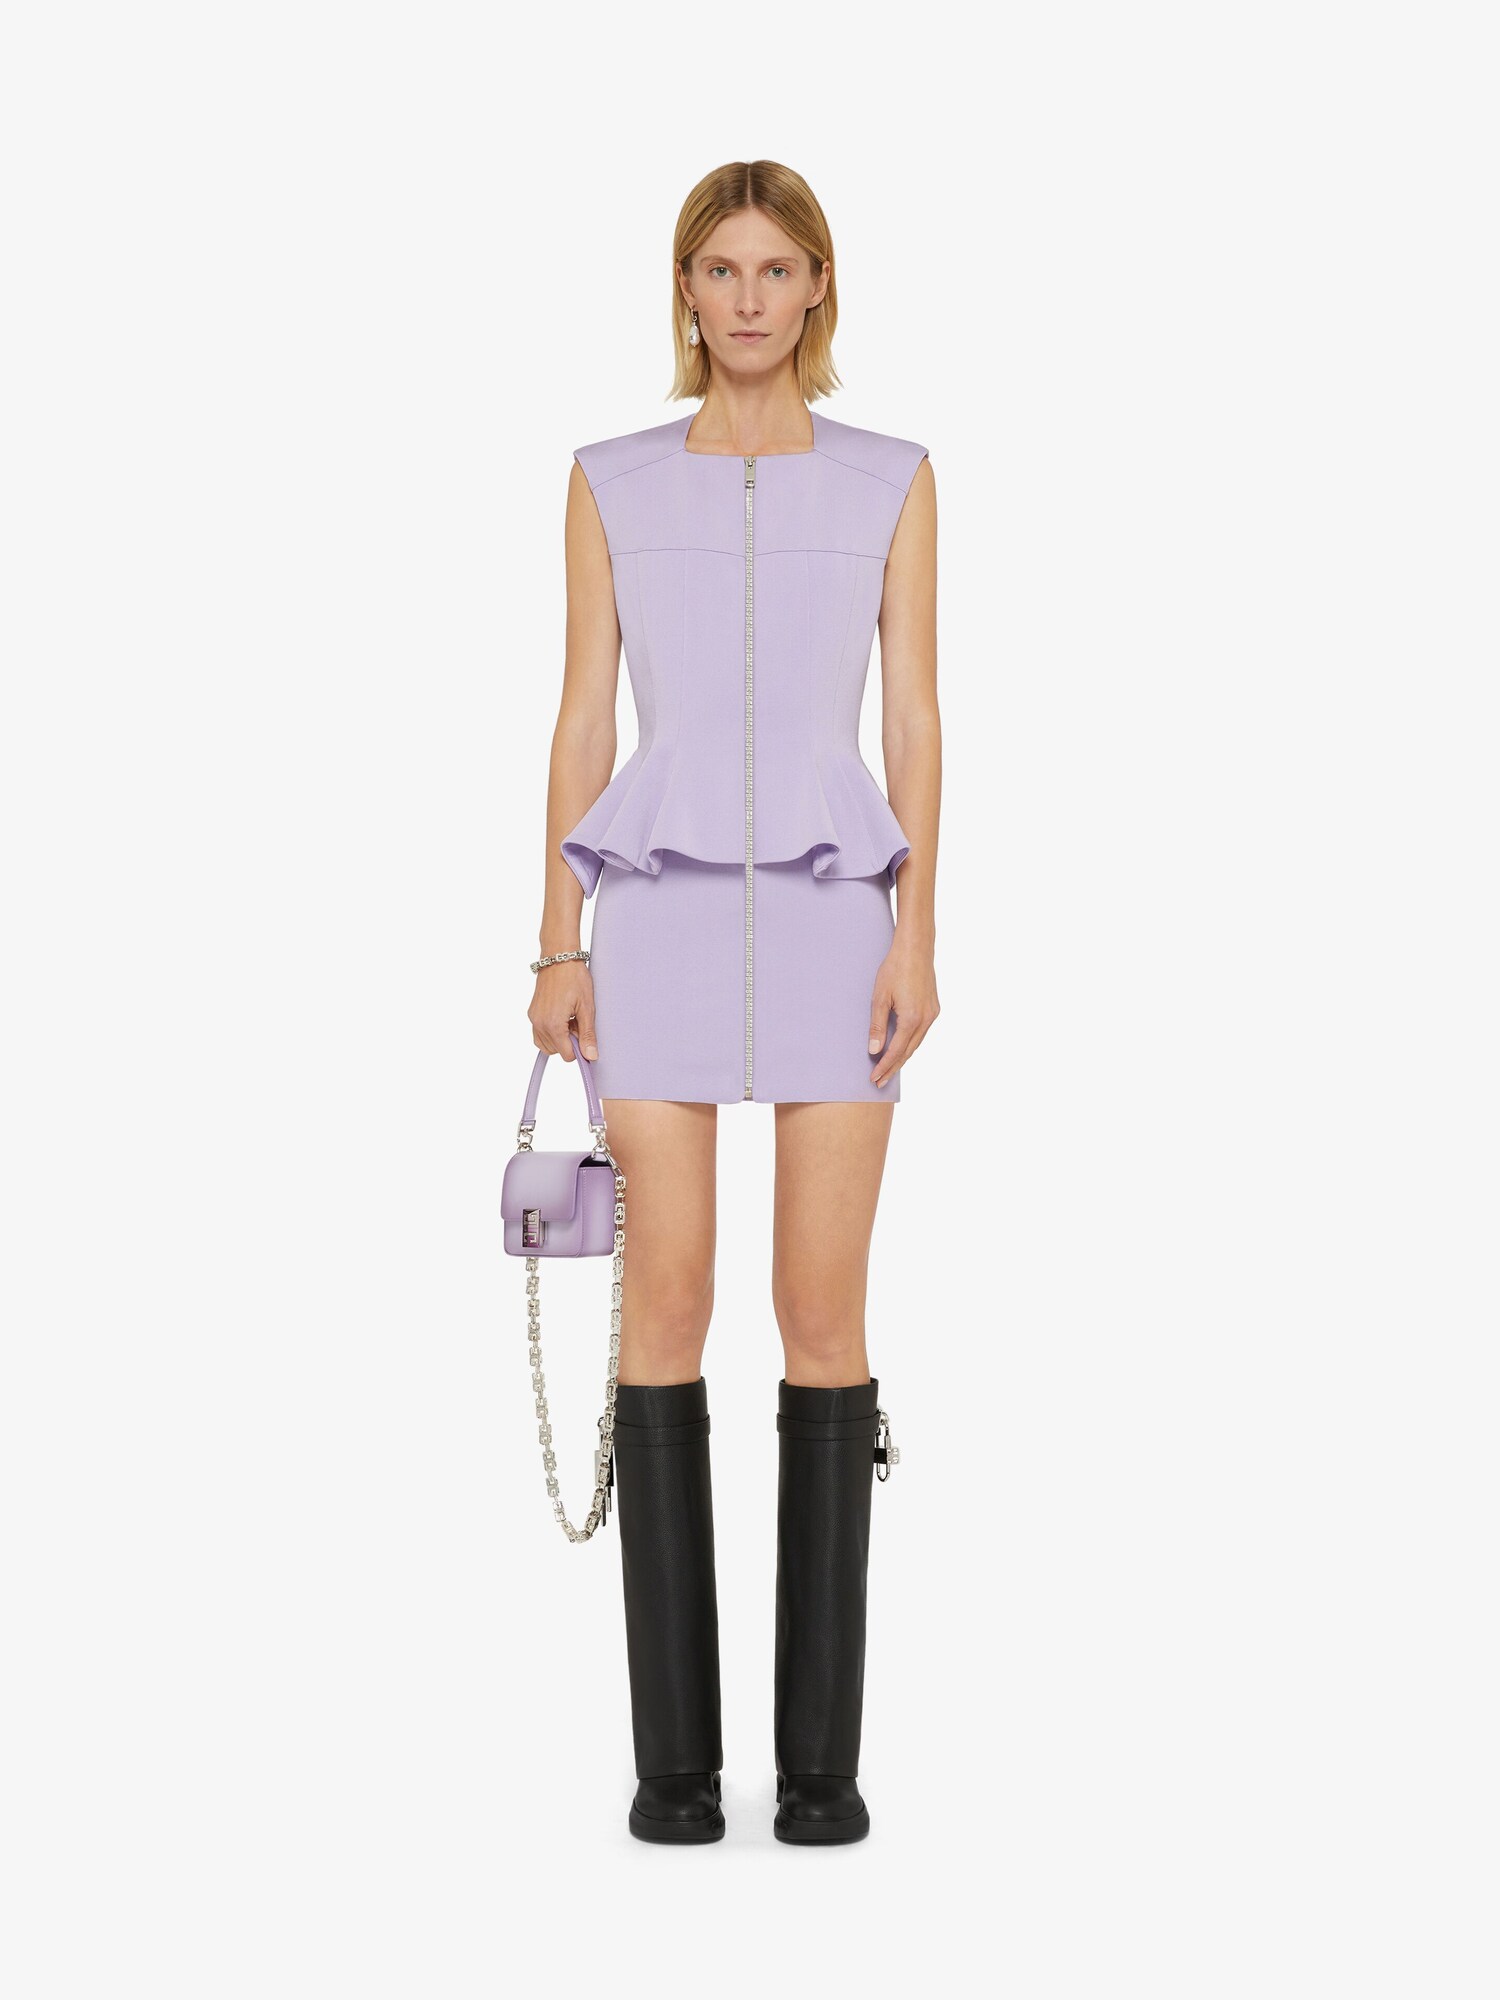 givenchy.com | Dress in punto milano with 4g zip